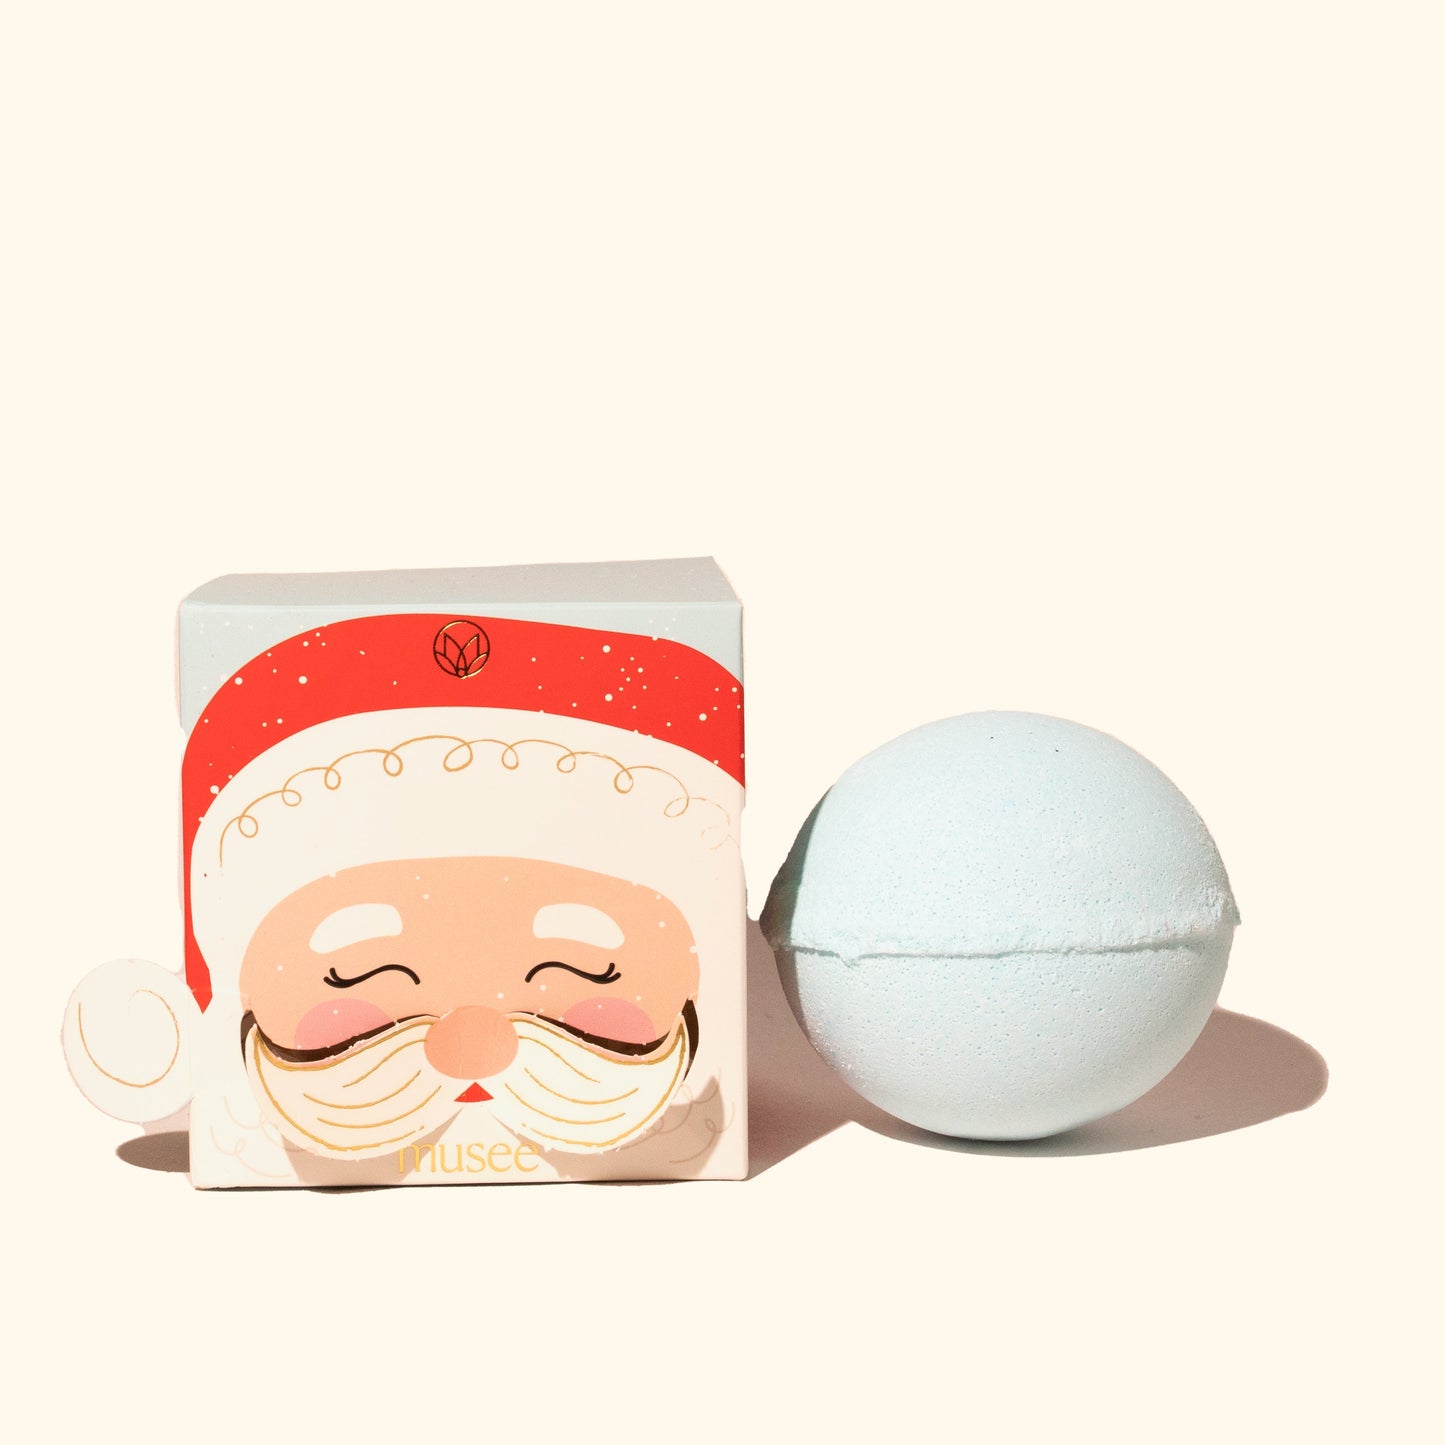 Musee "Santa Claus is Coming to Town" Boxed Bath Balm